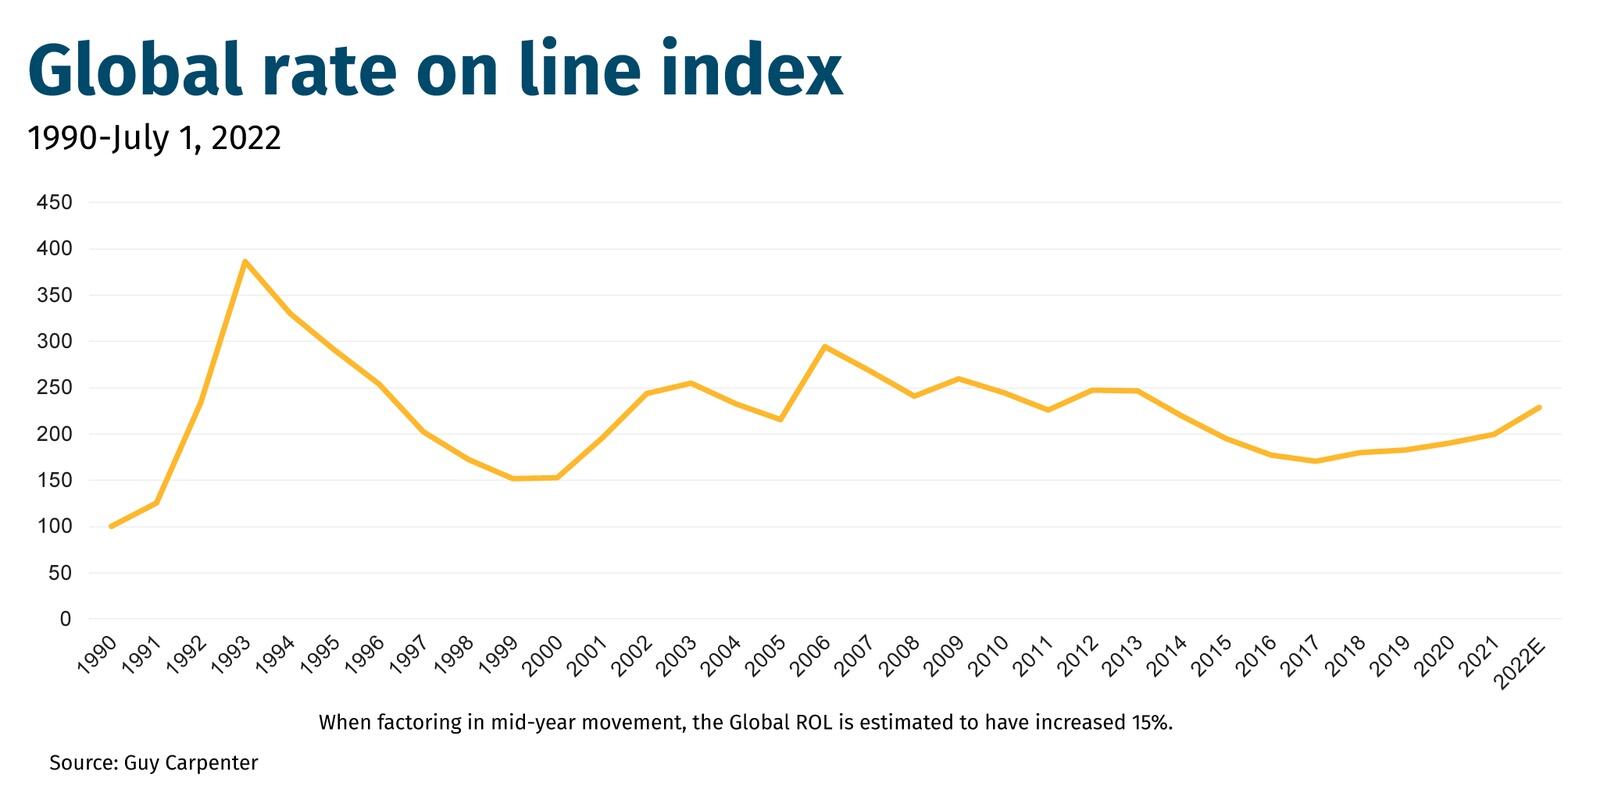 Global rate on line index